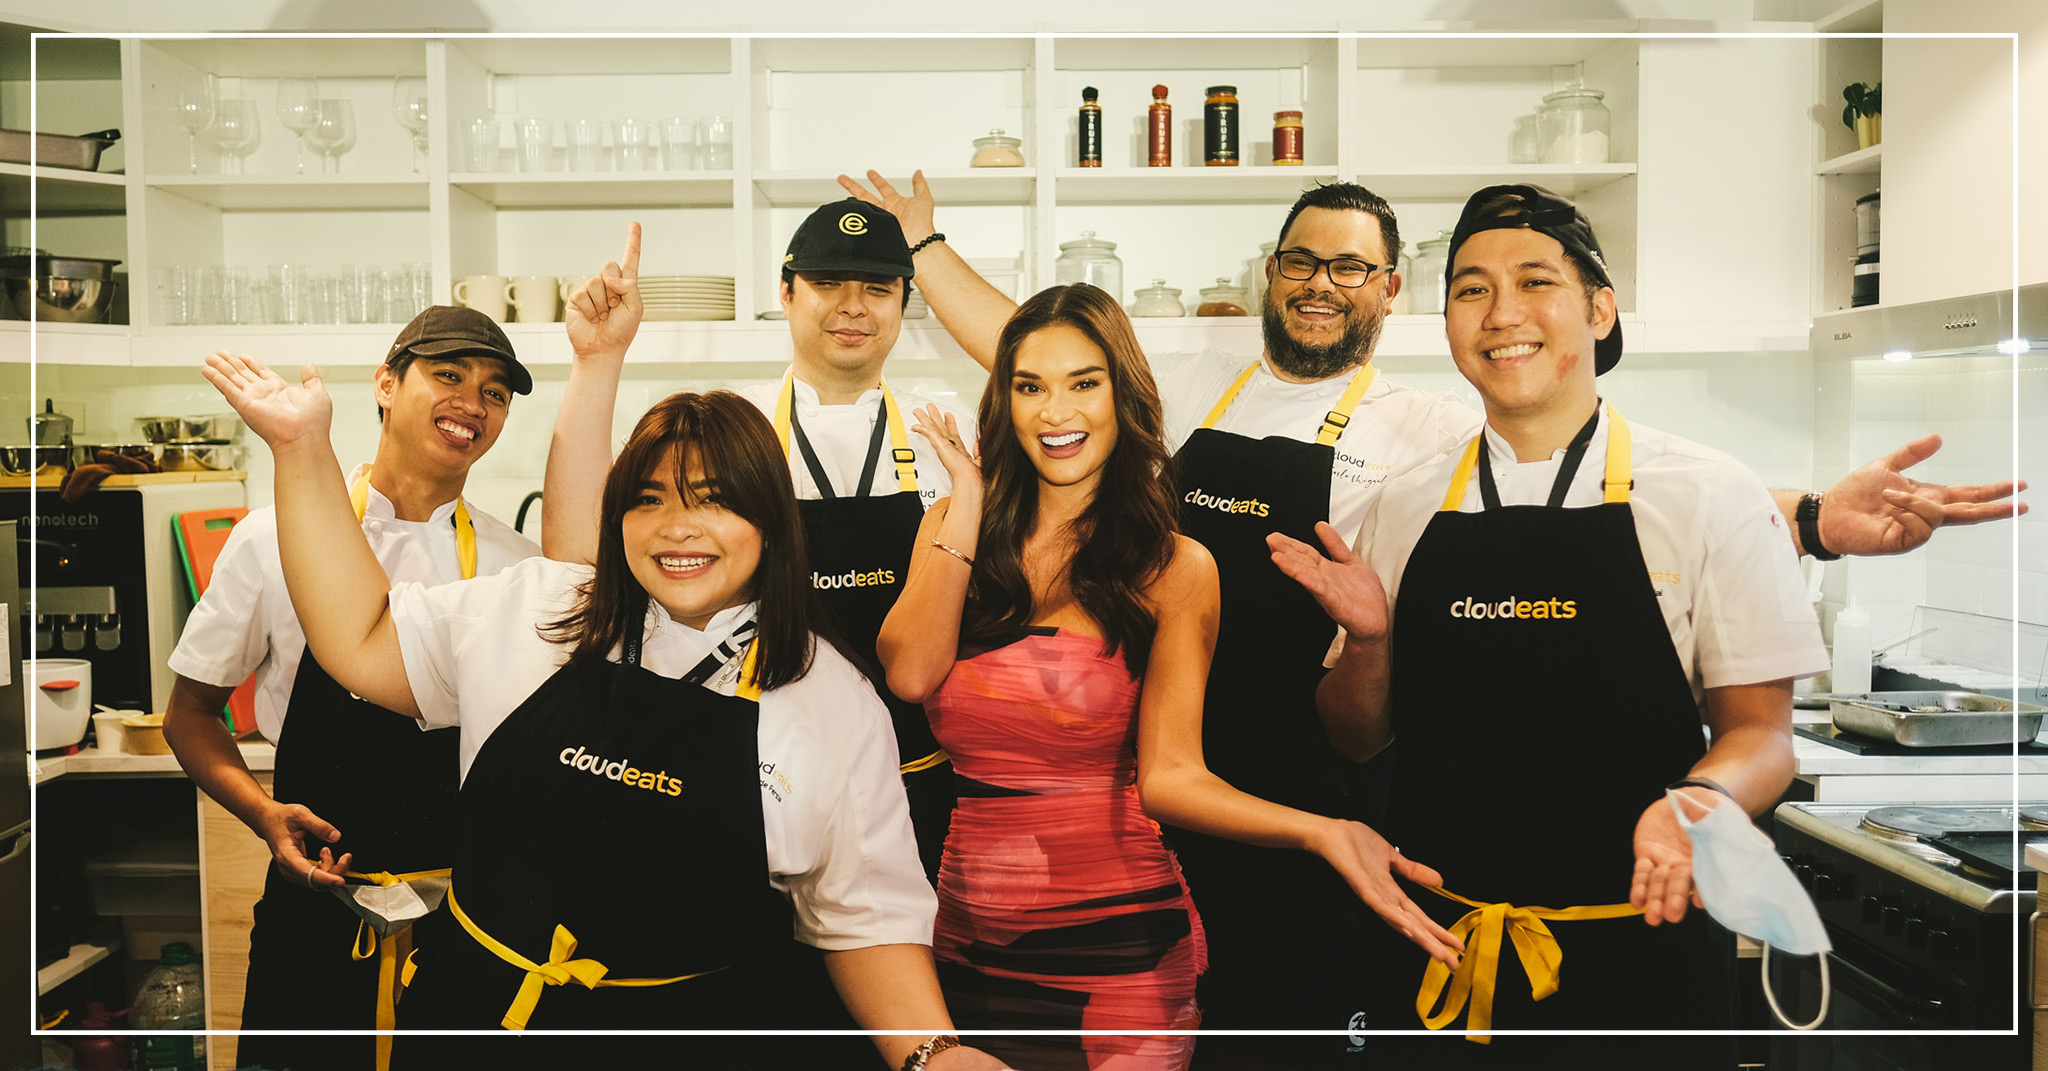 Pia Wurtzbach takes you on a culinary journey with “Pia’s Kitchen”